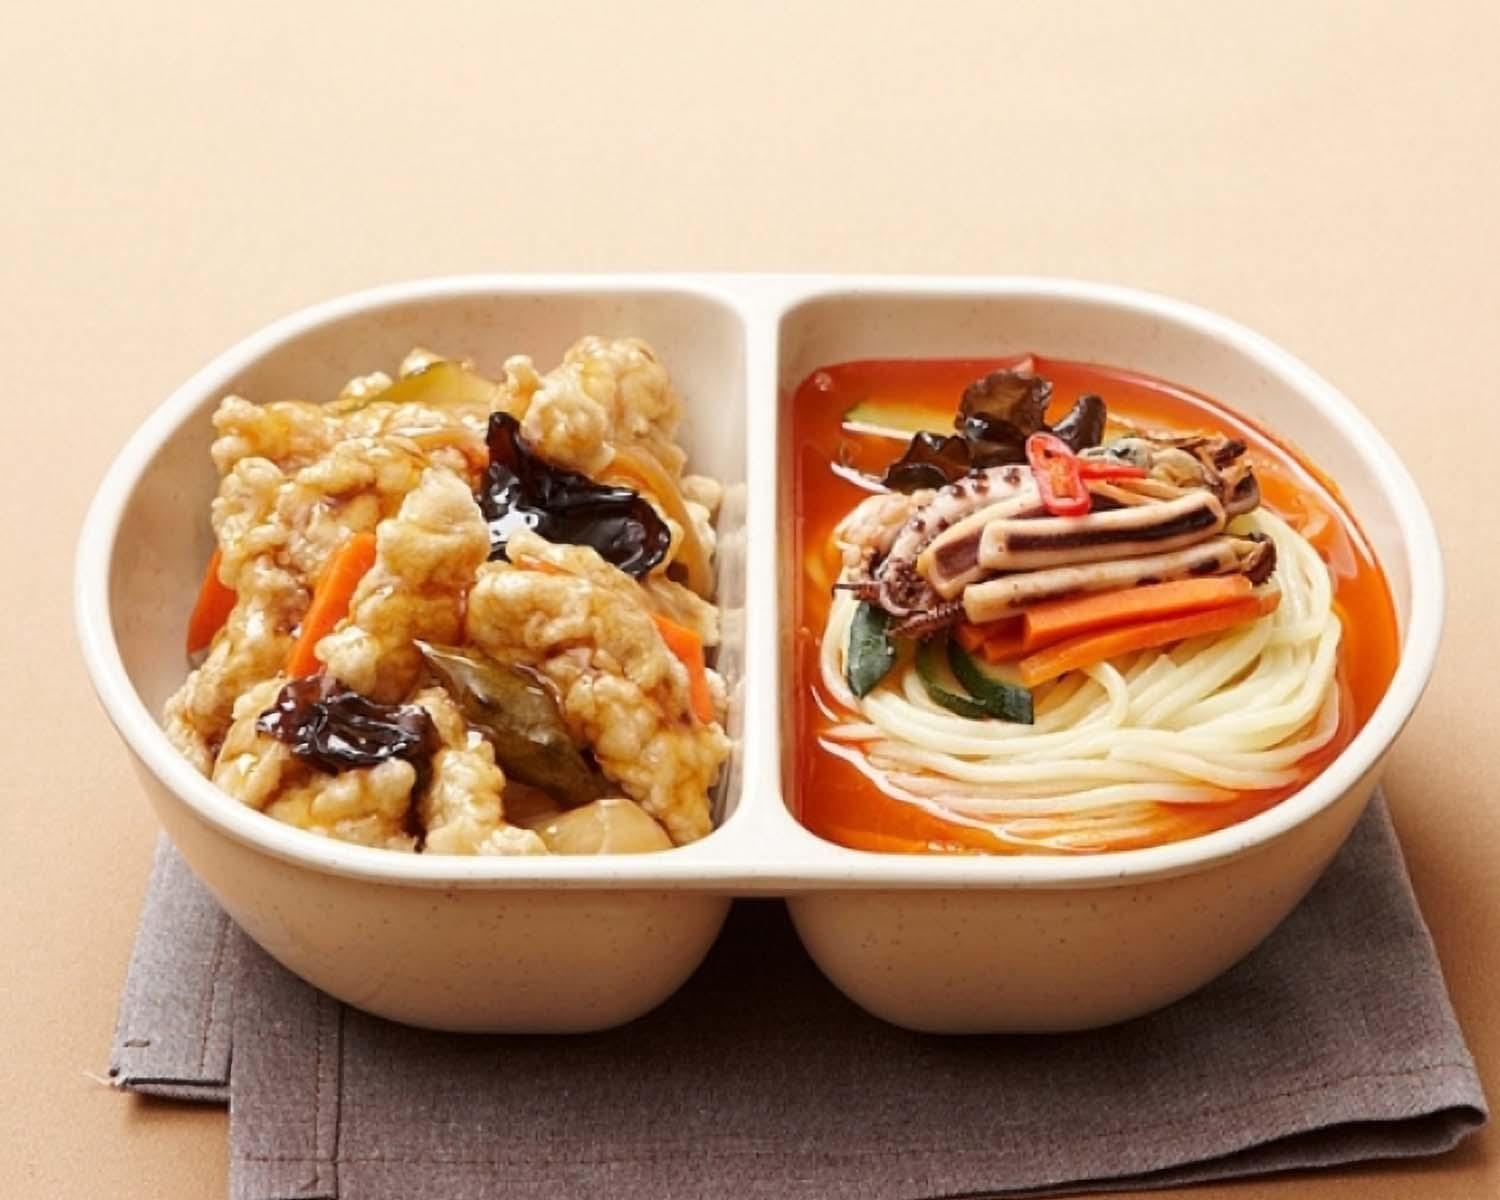 A delicious Chinese food delivery with Tangsuyuk and Jjambbong set, served with tableware and ingredients.